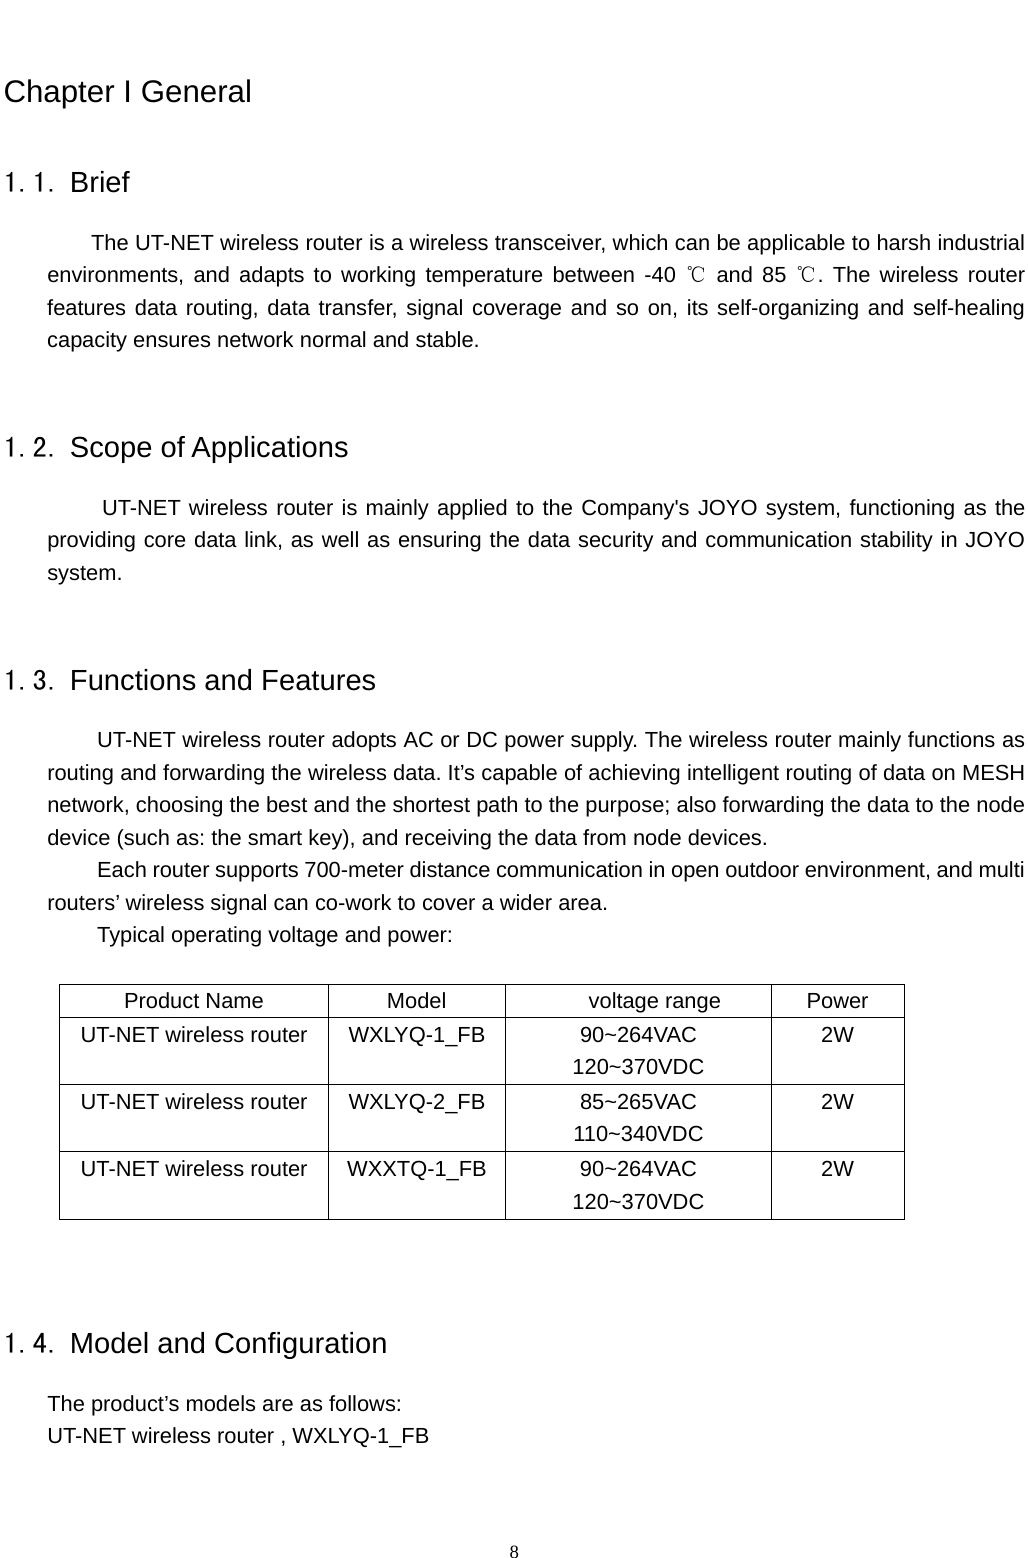  8 Chapter I General 1.1. Brief The UT-NET wireless router is a wireless transceiver, which can be applicable to harsh industrial environments, and adapts to working temperature between -40   ℃and 85  . The wireless router ℃features data routing, data transfer, signal coverage and so on, its self-organizing and self-healing capacity ensures network normal and stable.    1.2. Scope of Applications UT-NET wireless router is mainly applied to the Company&apos;s JOYO system, functioning as the providing core data link, as well as ensuring the data security and communication stability in JOYO system.  1.3. Functions and Features UT-NET wireless router adopts AC or DC power supply. The wireless router mainly functions as routing and forwarding the wireless data. It’s capable of achieving intelligent routing of data on MESH network, choosing the best and the shortest path to the purpose; also forwarding the data to the node device (such as: the smart key), and receiving the data from node devices. Each router supports 700-meter distance communication in open outdoor environment, and multi routers’ wireless signal can co-work to cover a wider area. Typical operating voltage and power:  Product Name  Model     voltage range  Power UT-NET wireless router  WXLYQ-1_FB  90~264VAC 120~370VDC 2W UT-NET wireless router  WXLYQ-2_FB  85~265VAC 110~340VDC 2W UT-NET wireless router  WXXTQ-1_FB 90~264VAC 120~370VDC 2W   1.4. Model and Configuration The product’s models are as follows: UT-NET wireless router , WXLYQ-1_FB 